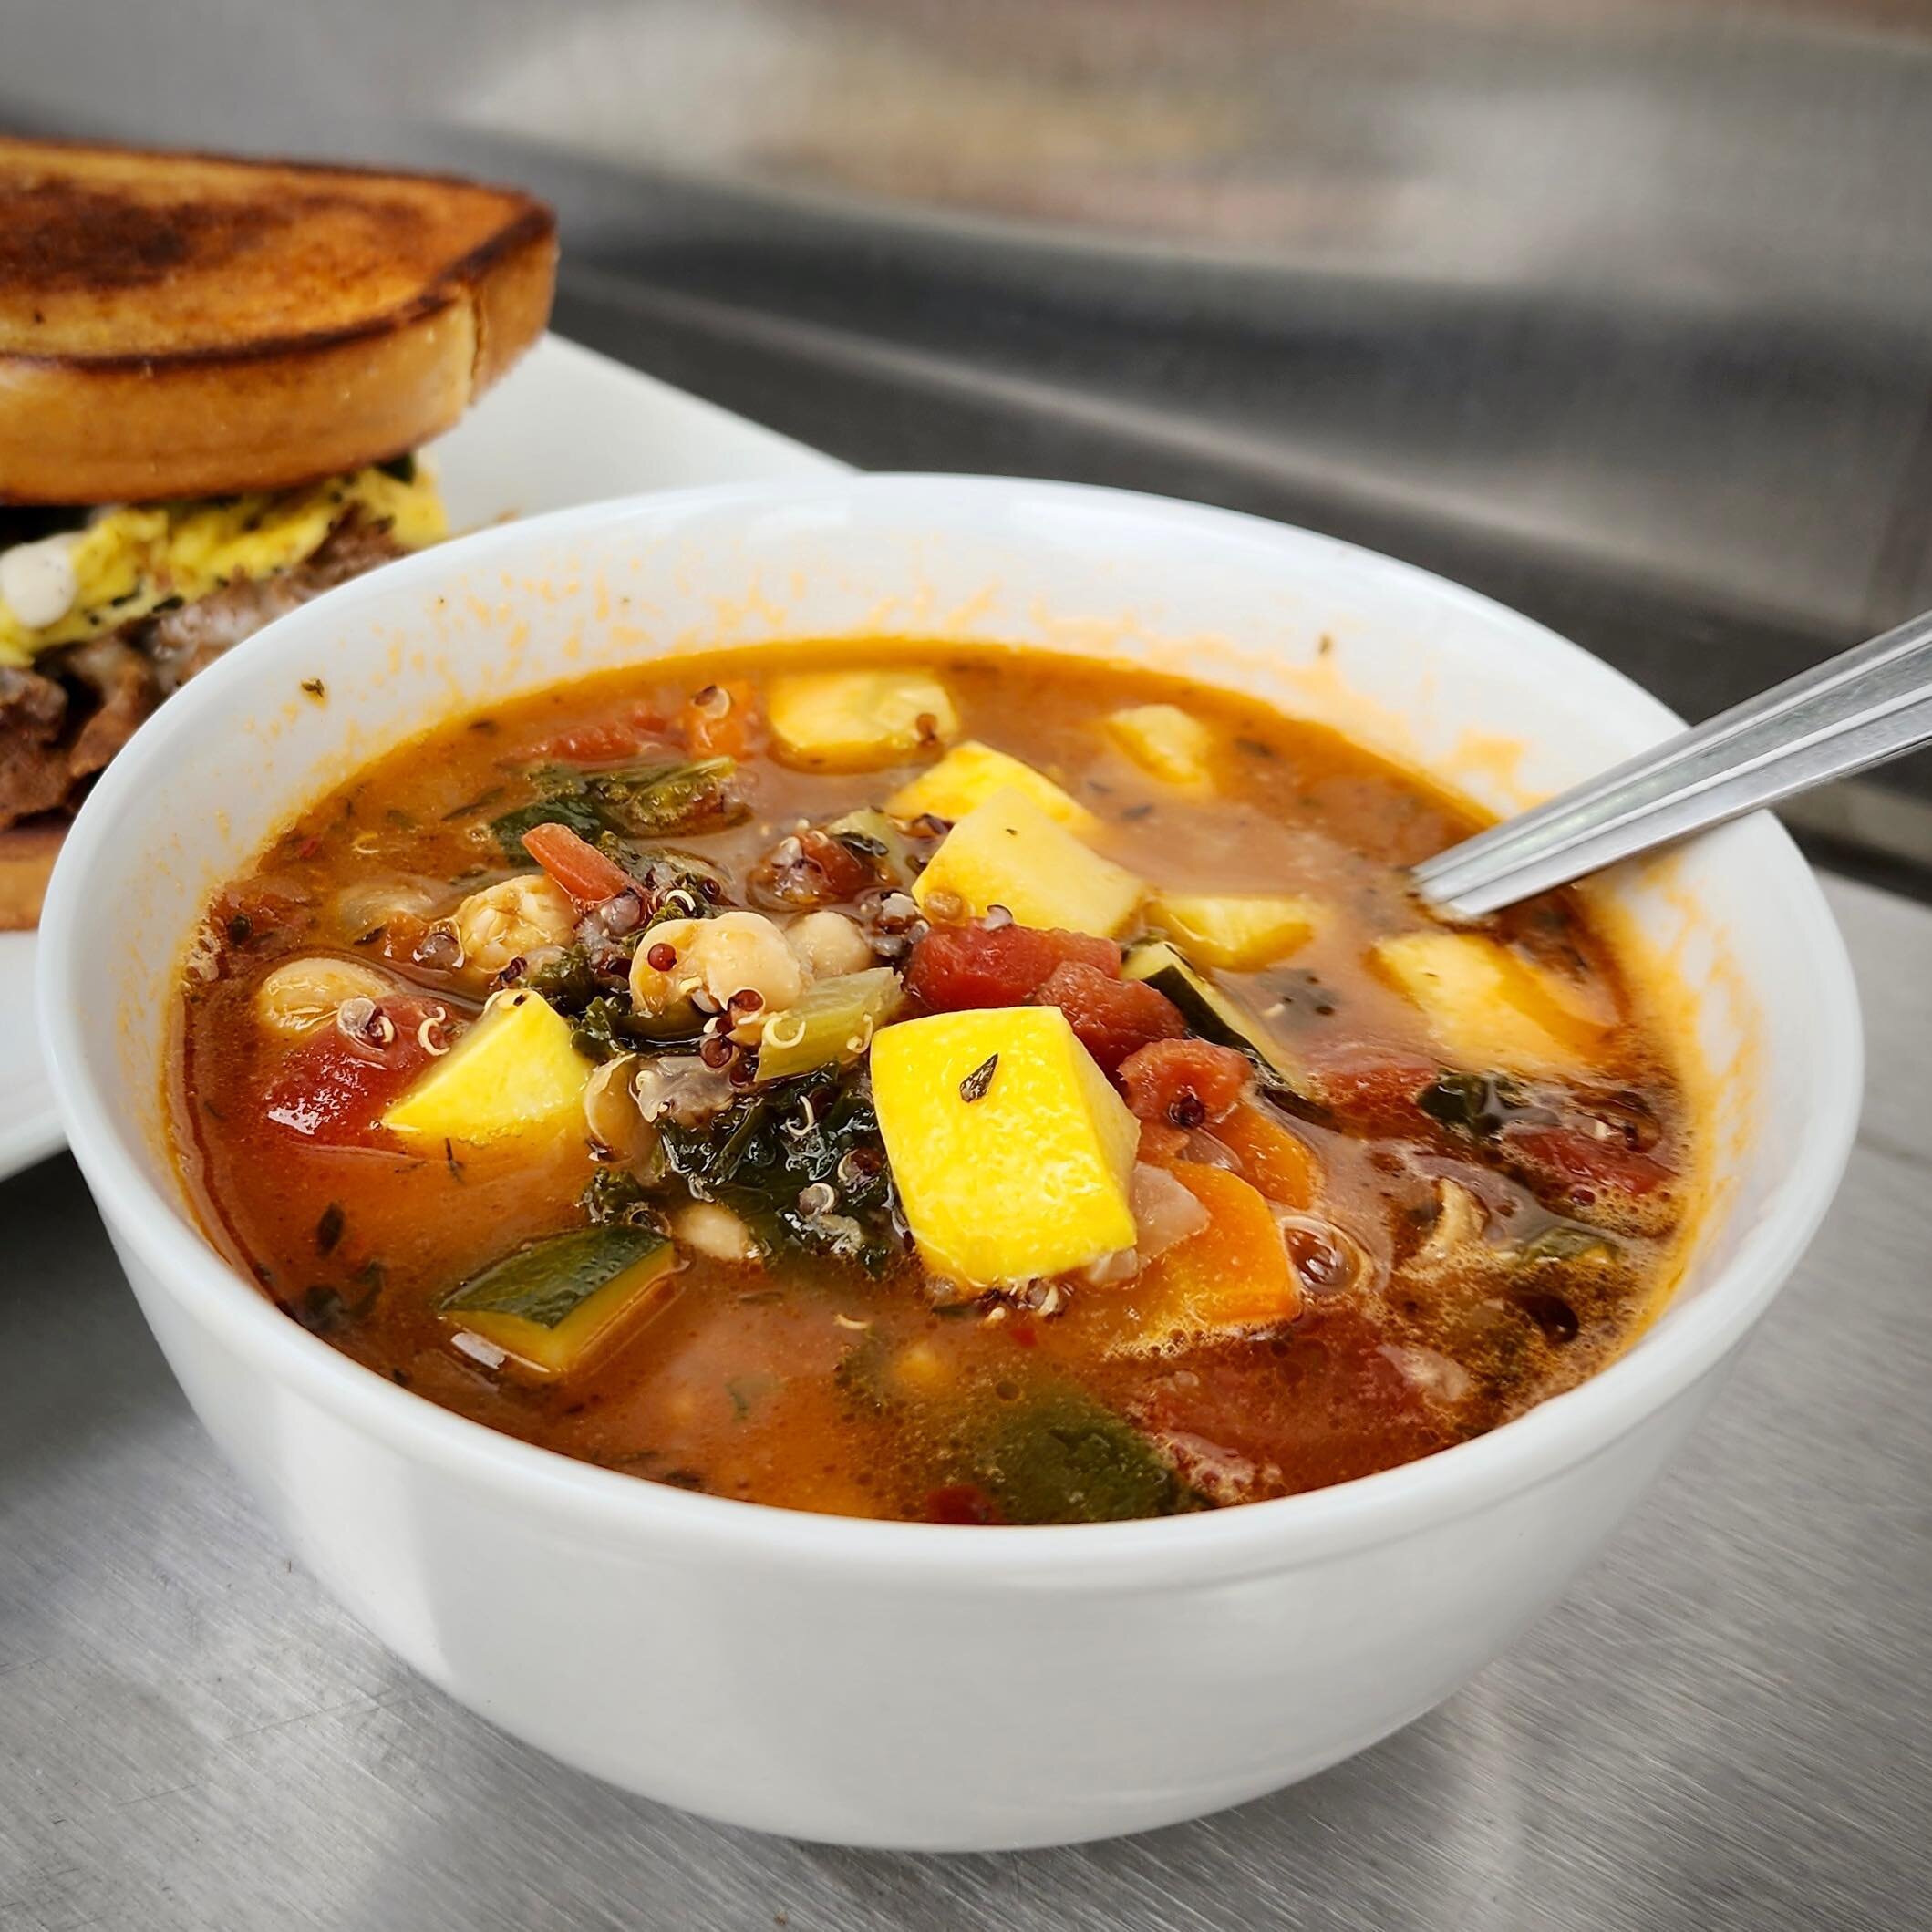 ✨Vegetable Quinoa Soup✨
Tender squash, zucchini, kale, chickpeas, tomatoes, and quinoa in an exquisitely flavorful broth, our Vegetable Quinoa Soup is a feel-good soup that deserves so much hype (it&rsquo;s my favorite so far of our soups!) Come try 